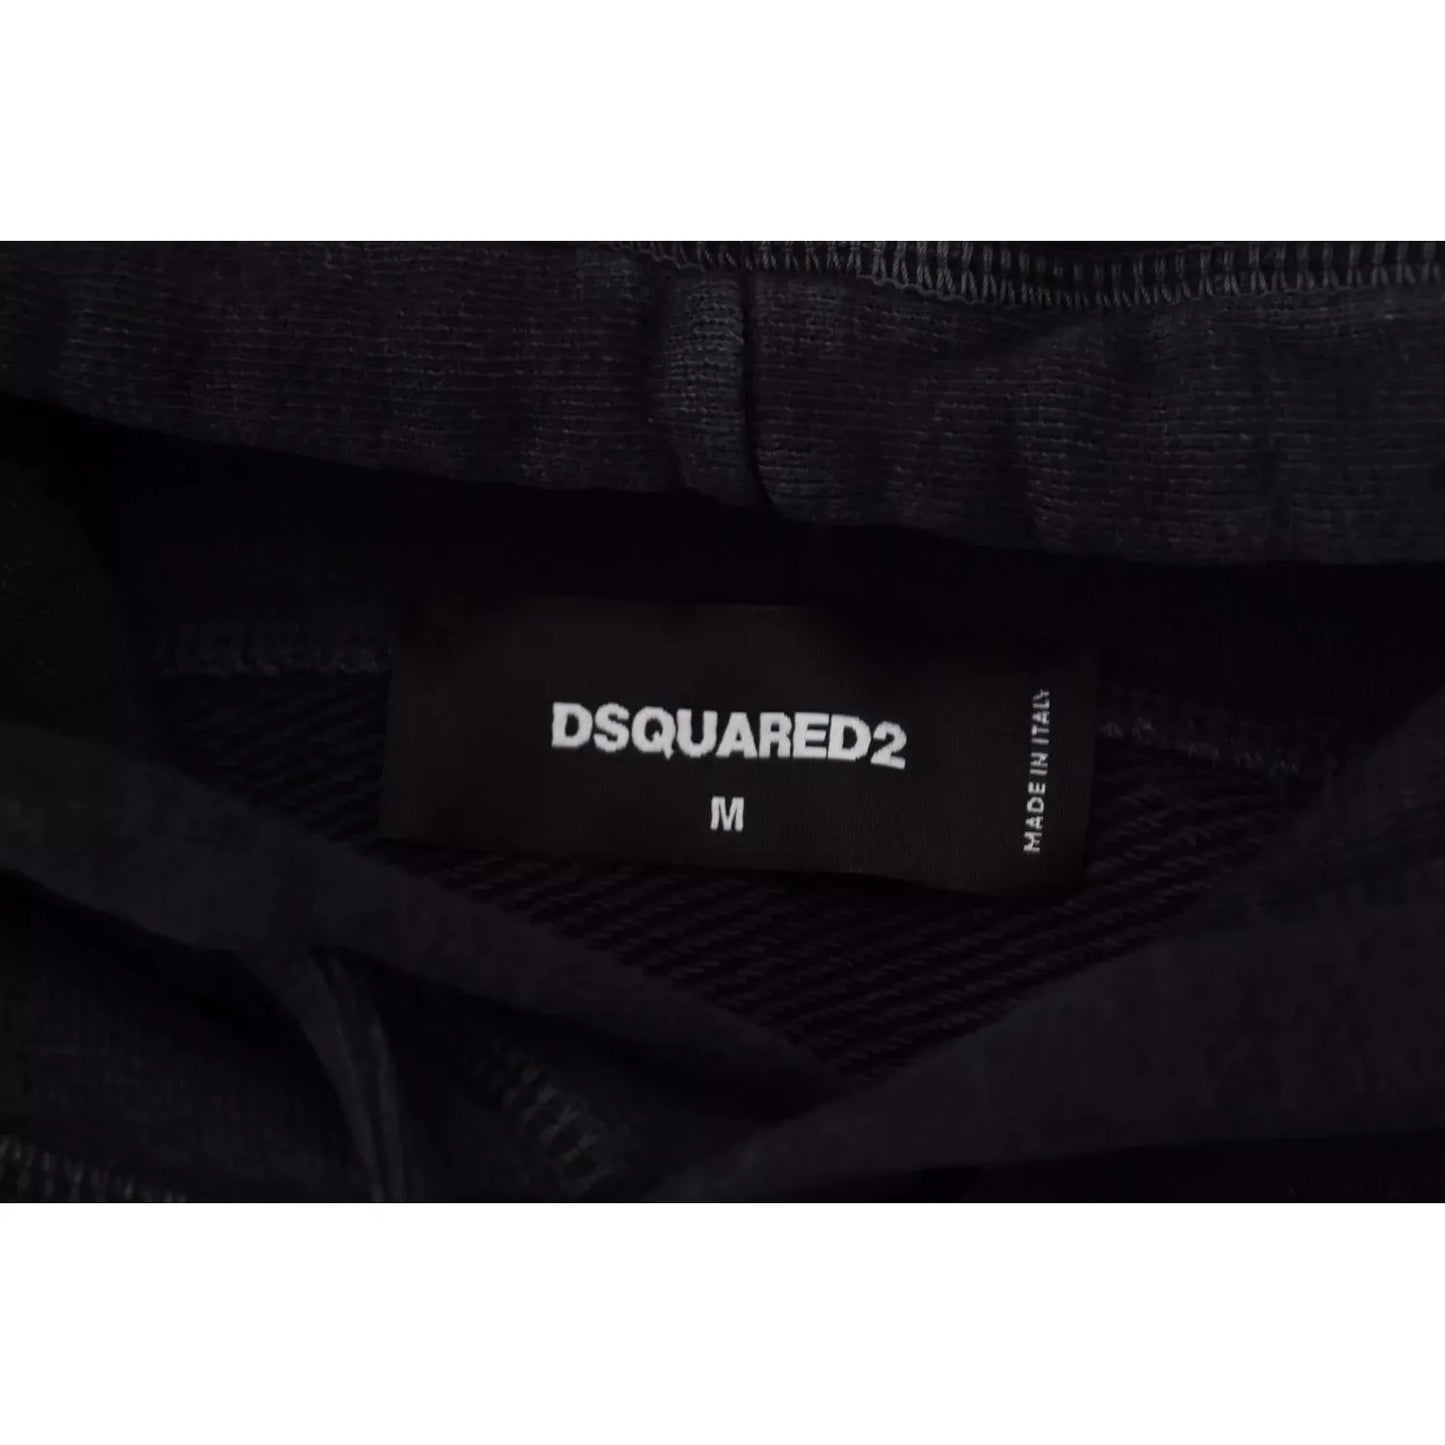 Dsquared² Black Cotton Hooded Printed Men Pullover Sweater black-cotton-hooded-printed-men-pullover-sweater